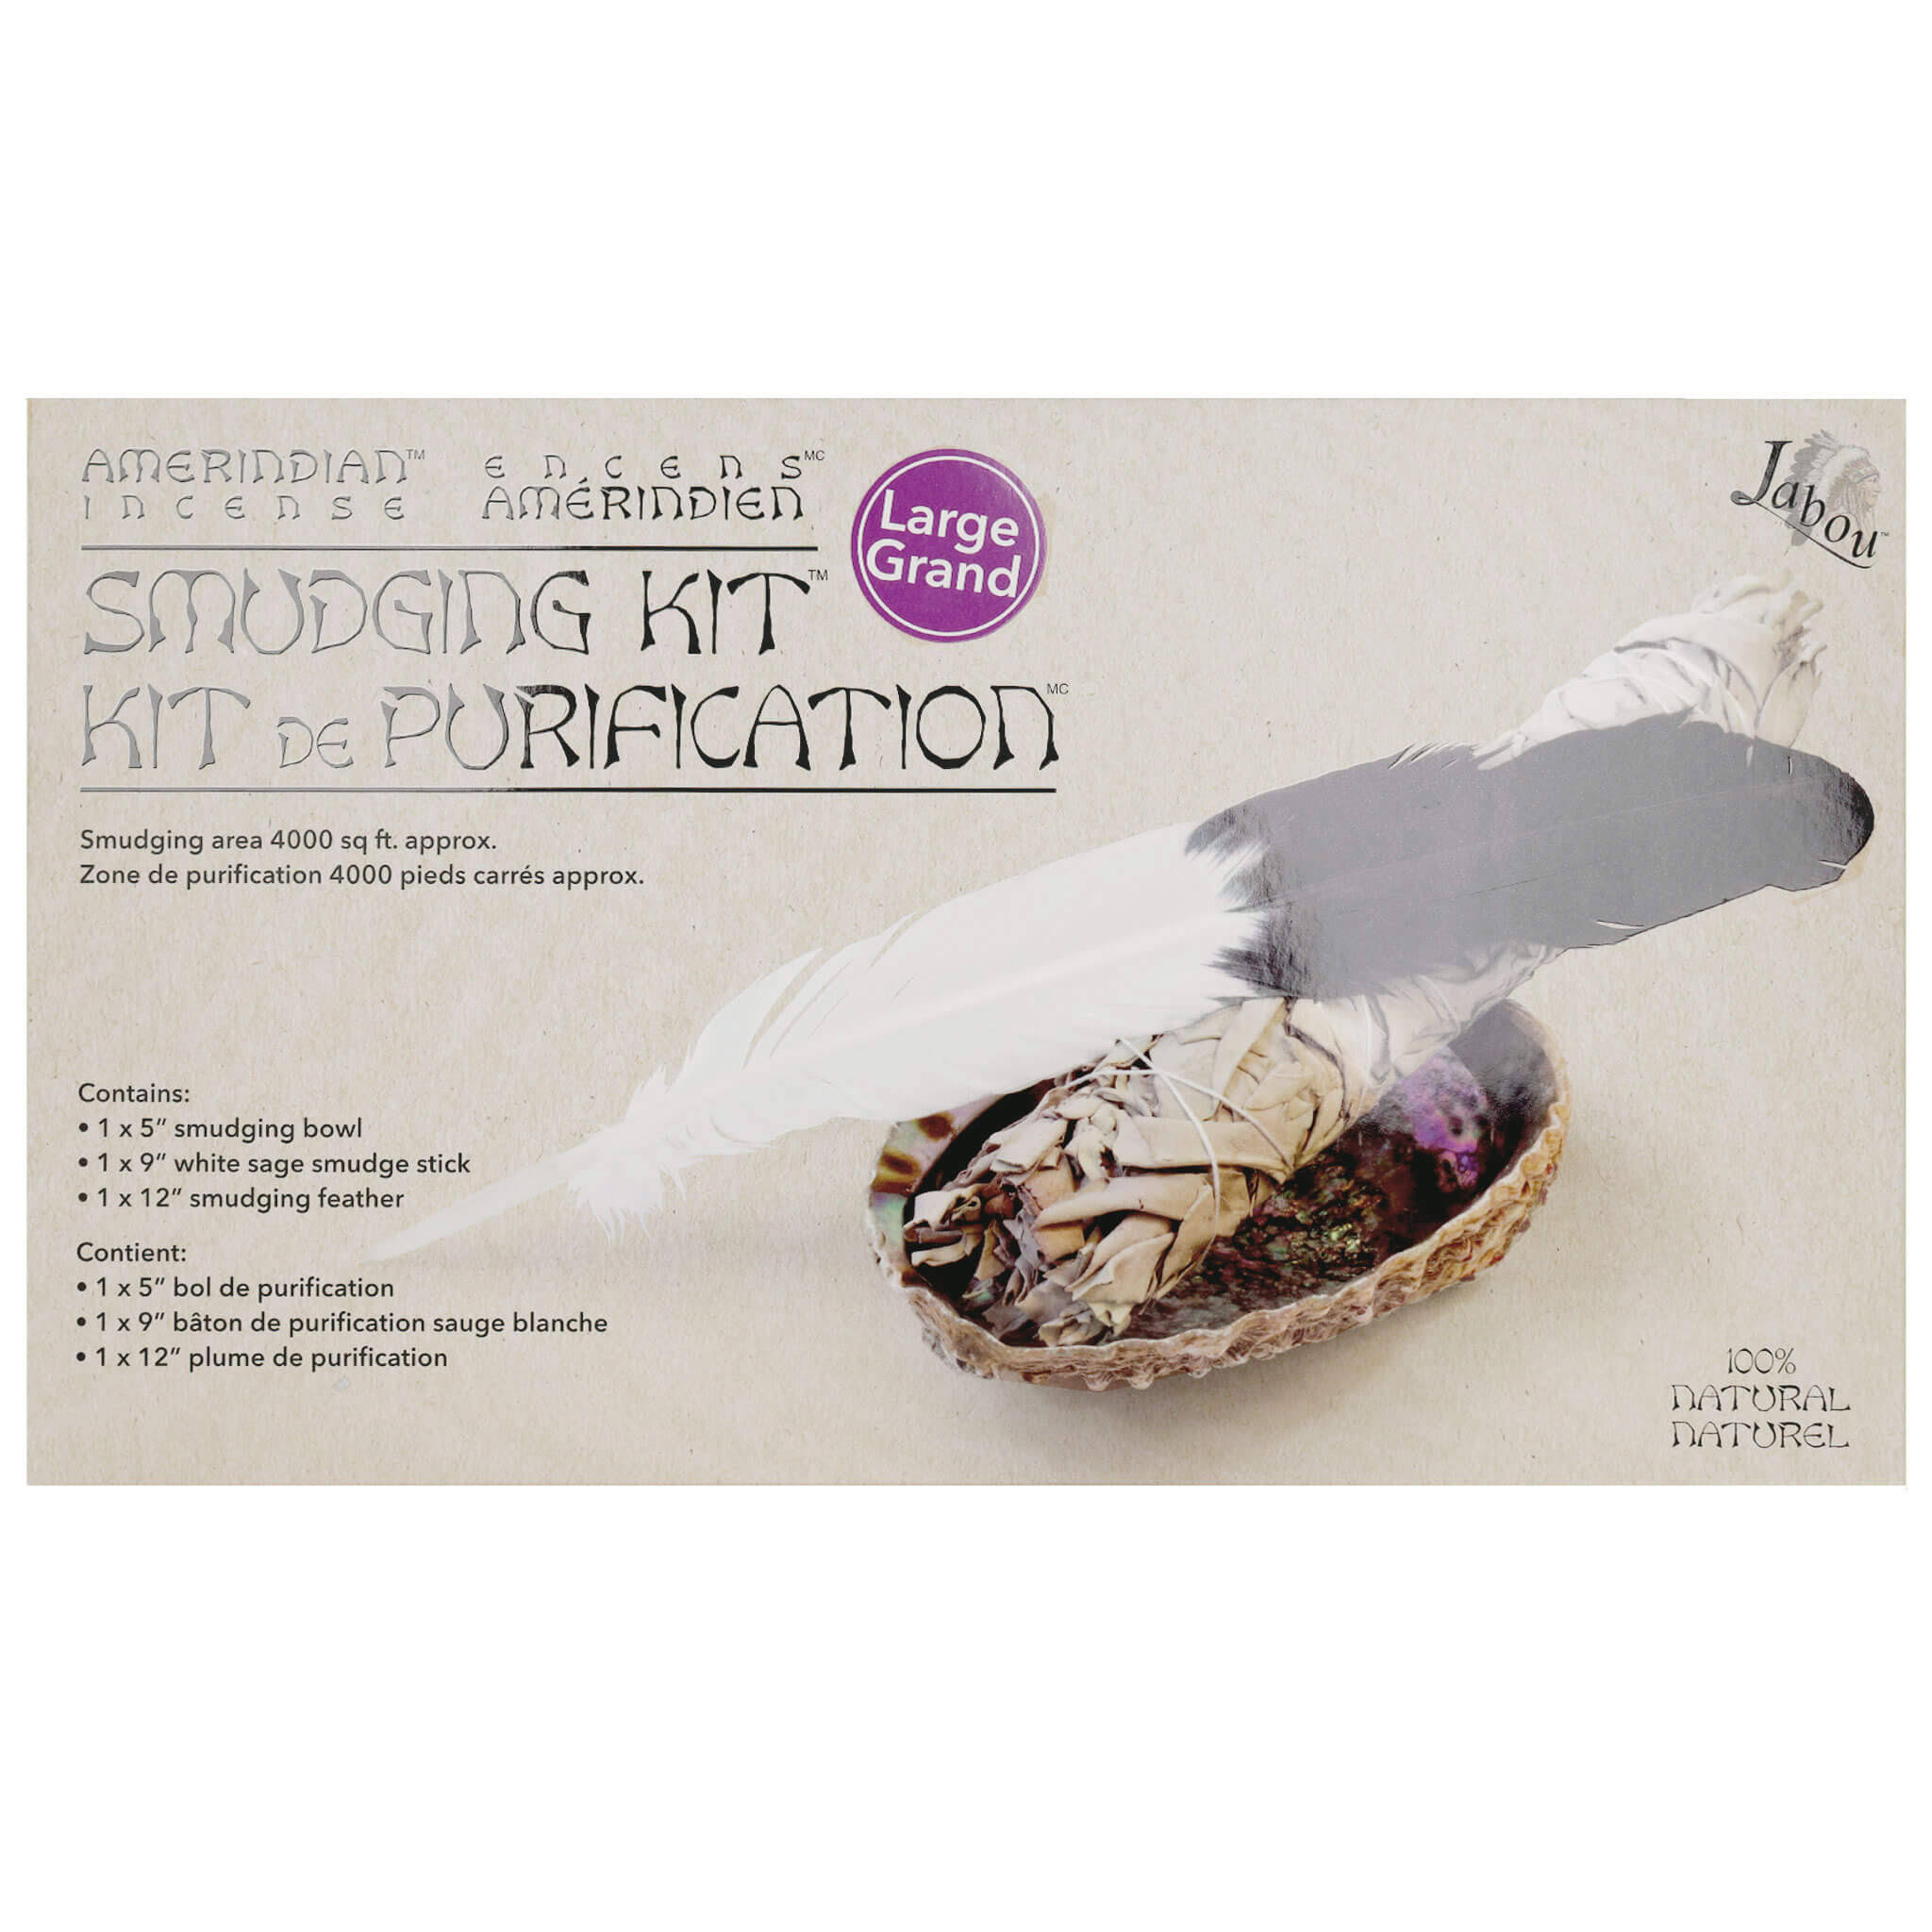 Jabou Amerindian Incense Smudging Kit - 12" Feather, with 9" White Sage